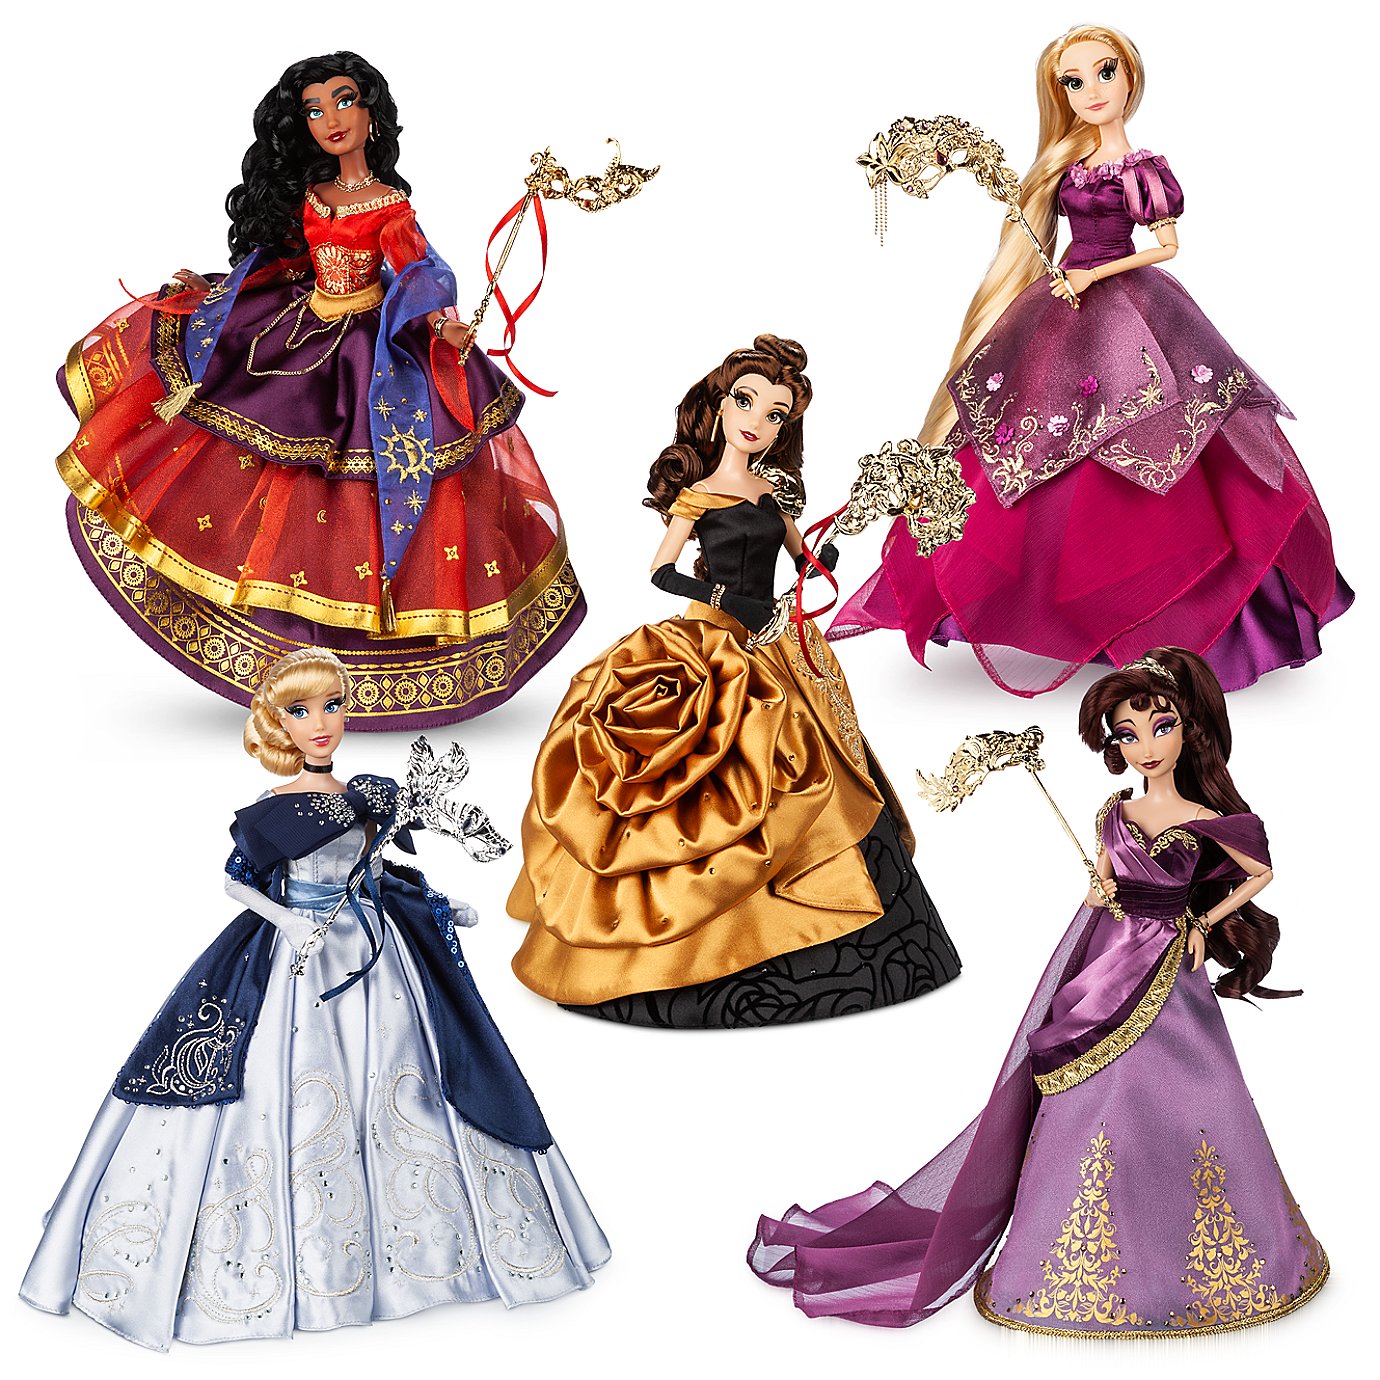 Disney Beauty and the Beast Designer Collection Midnight